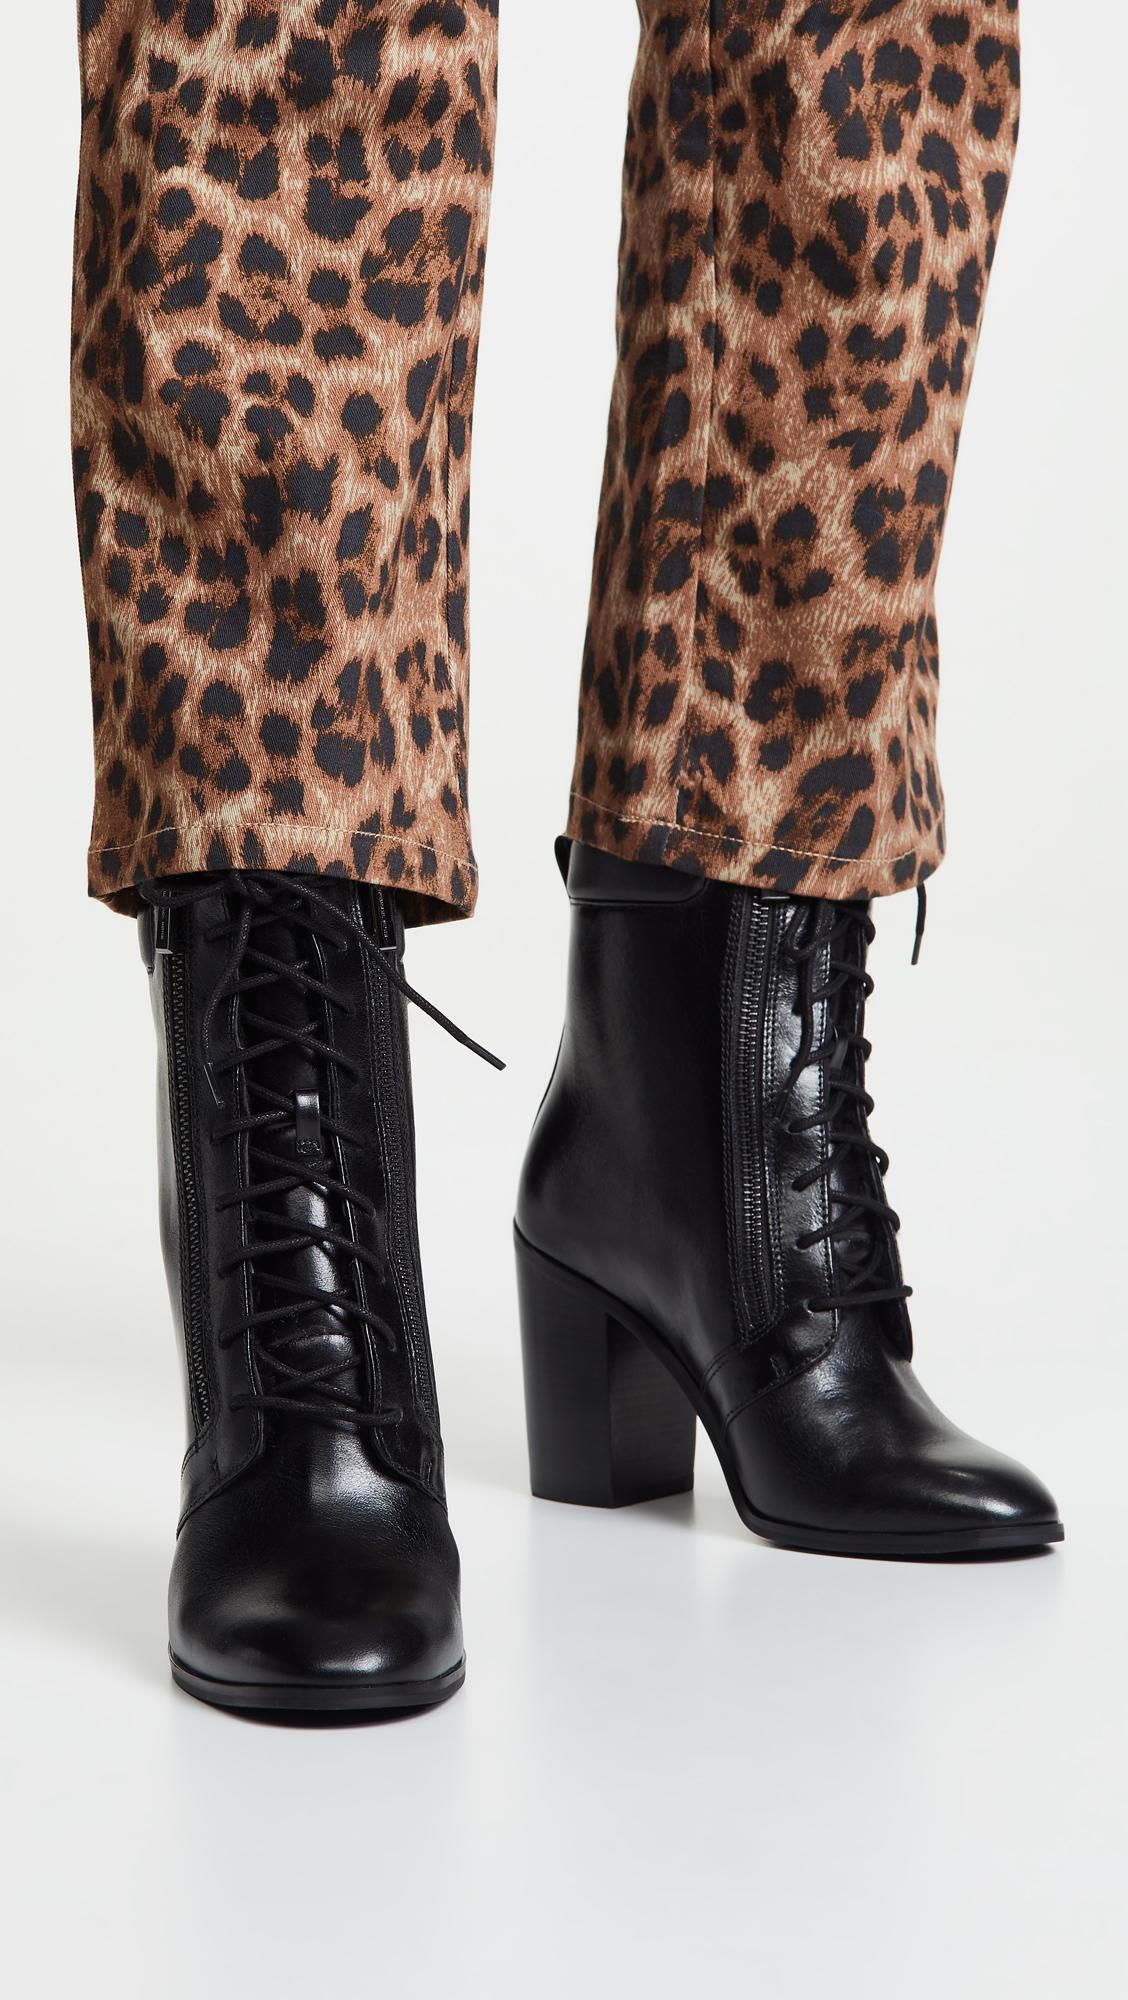 michael michael kors rosario leather ankle boot